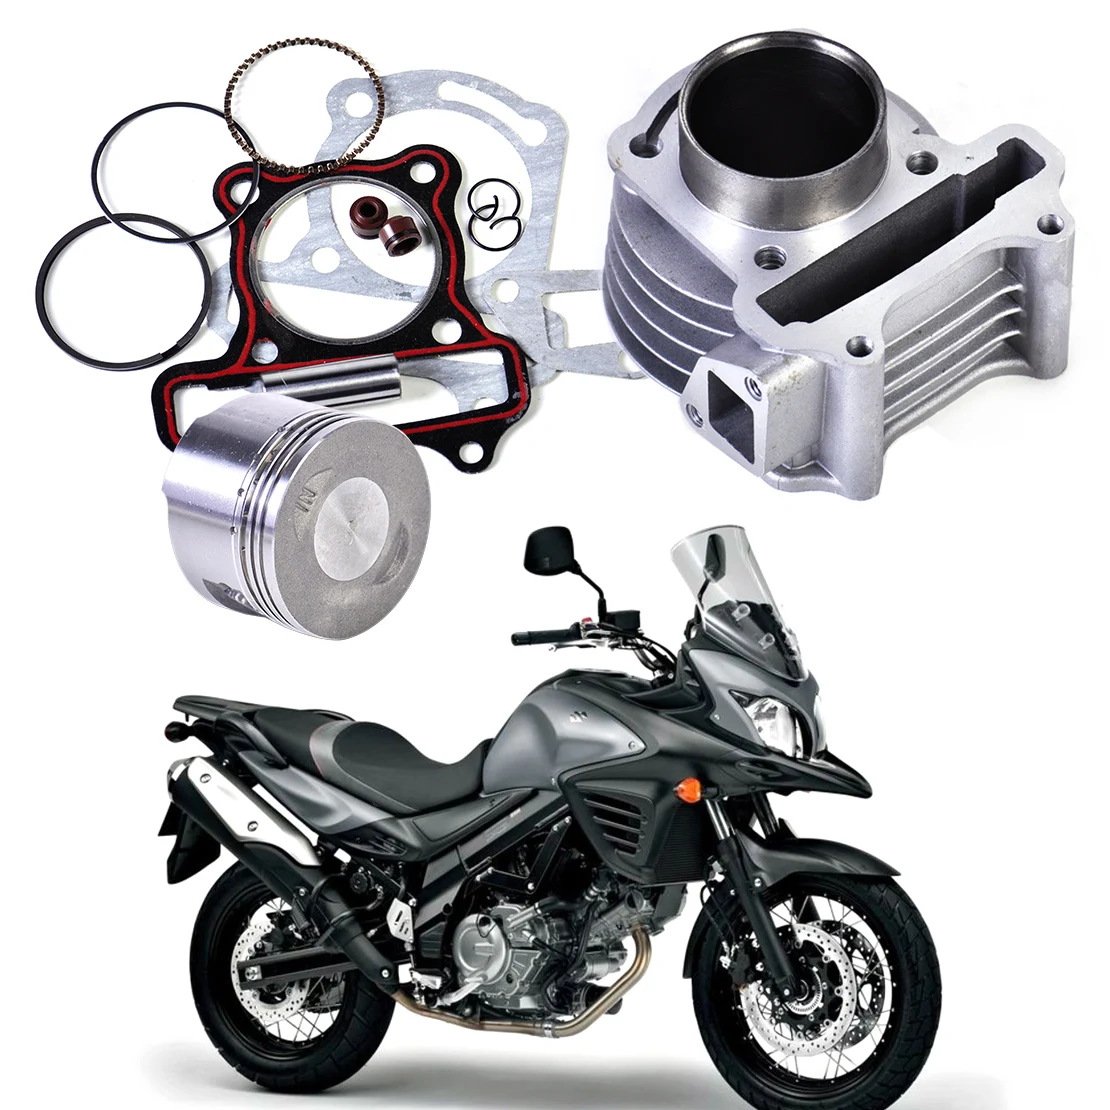 Image New Set 47mm Big Bore Kit Cylinder Piston Rings fit for GY6 50cc to 80cc 4 Stroke Scooter Moped ATV with 139QMB 139QMA engine